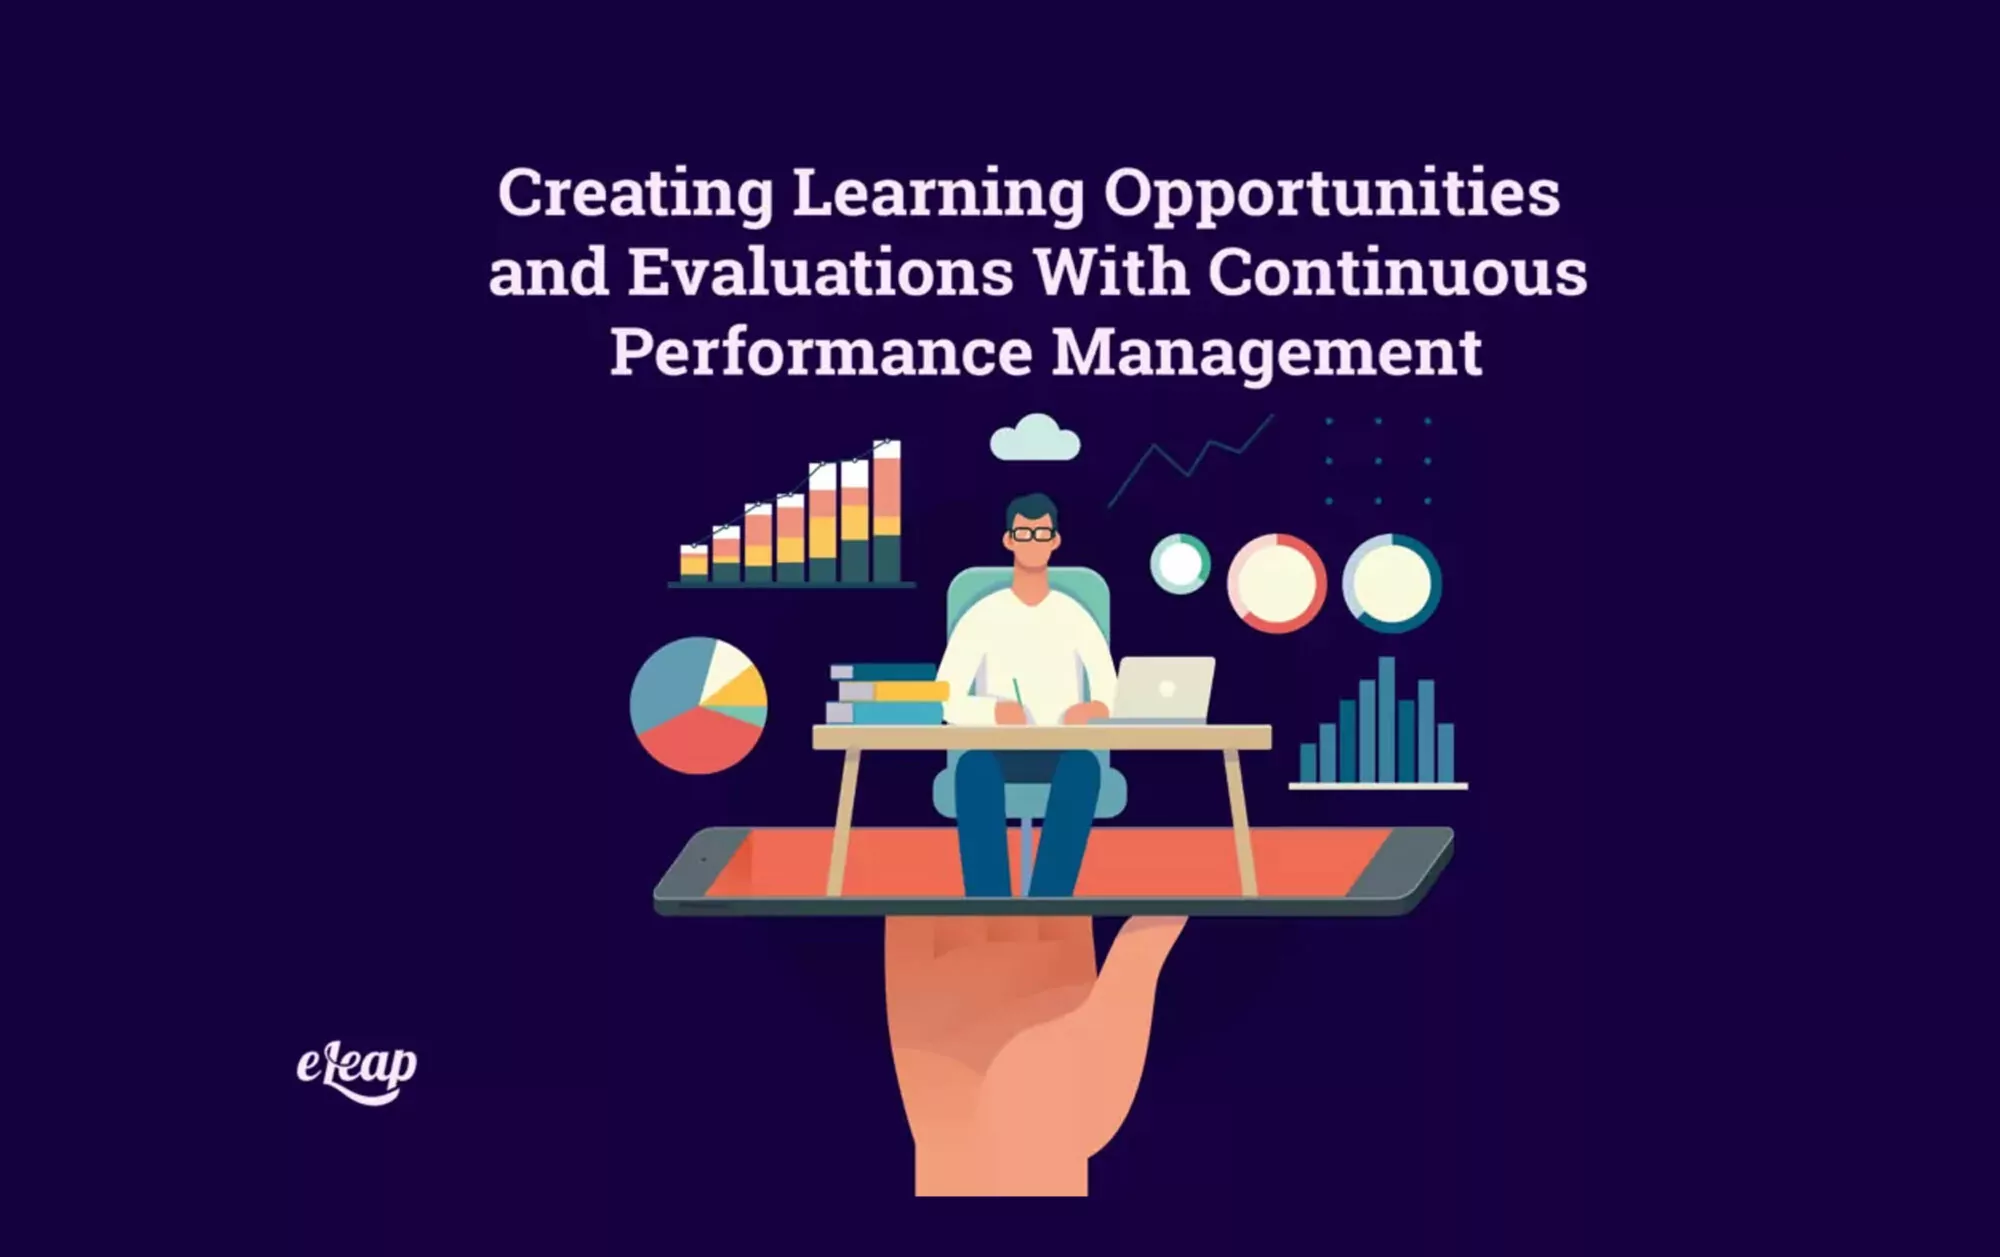 Creating Learning Opportunities and Evaluations With Continuous Performance Management